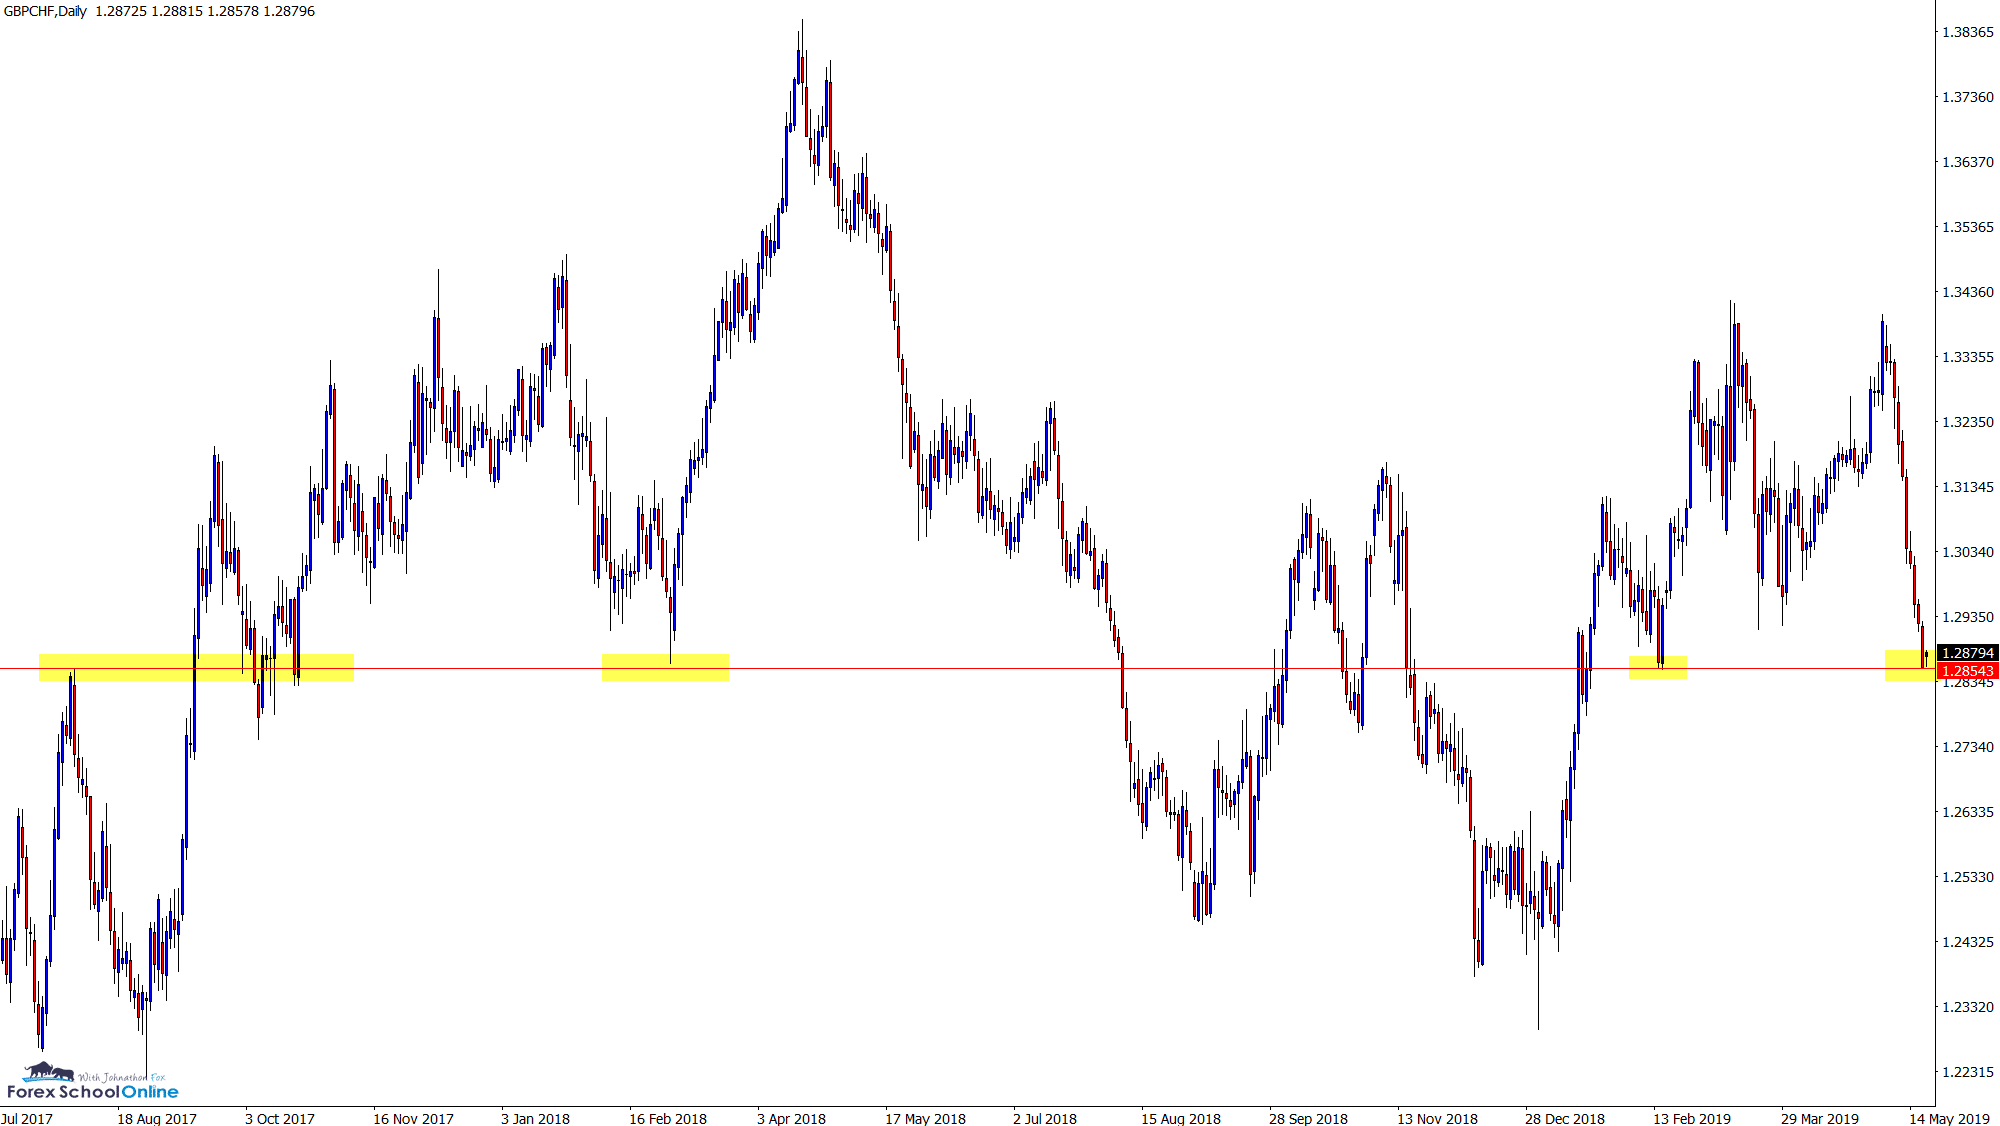 GBPCHF daily chart zoomed out